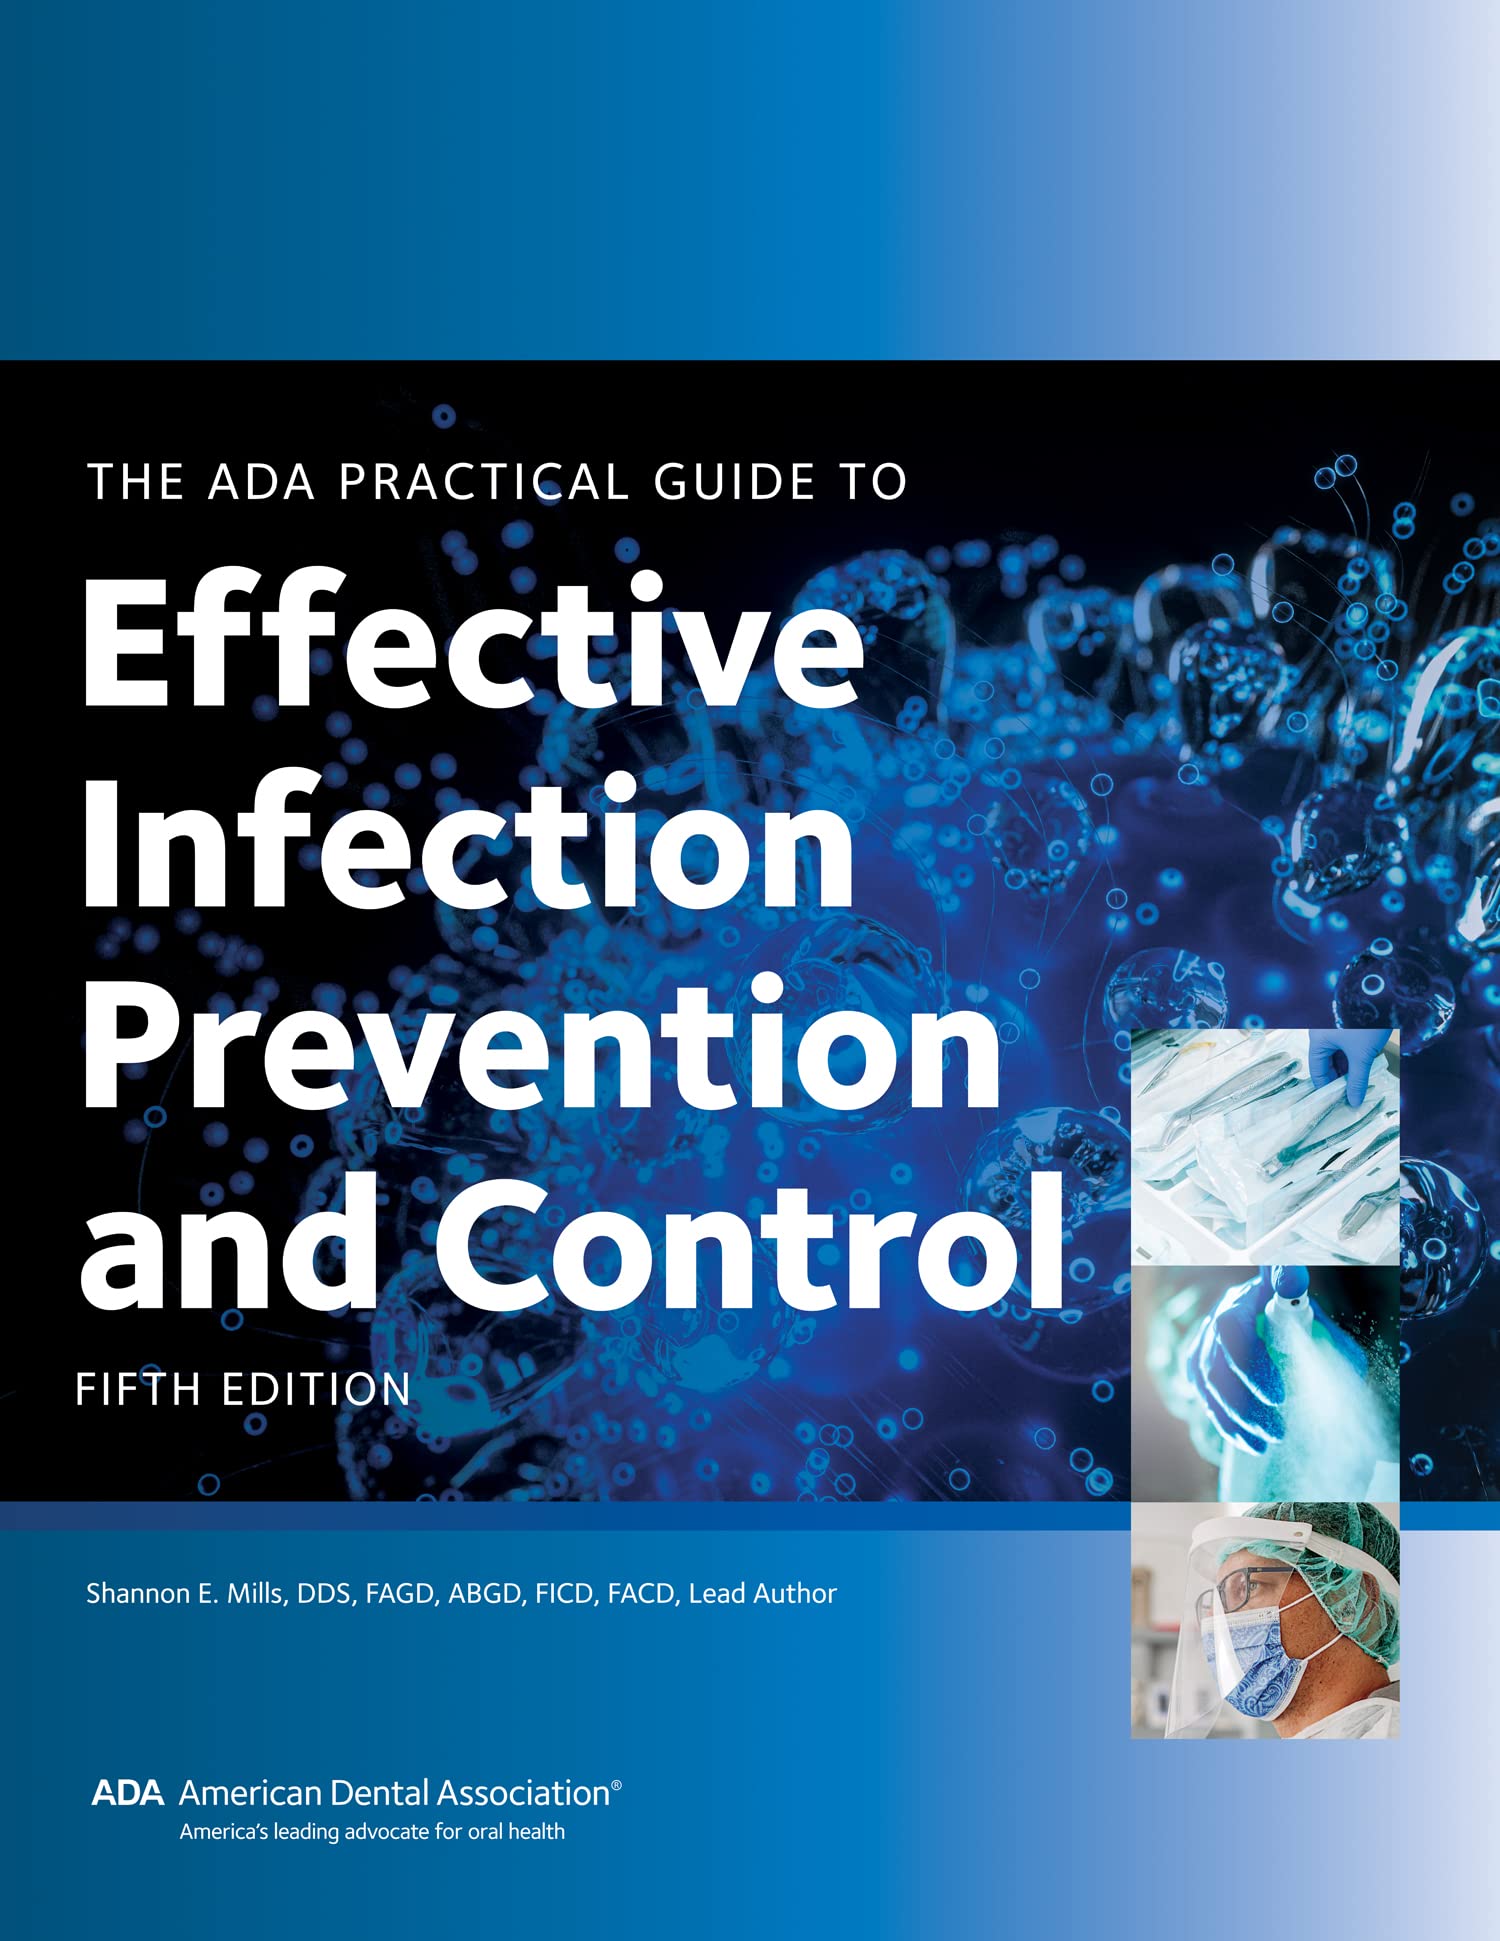 The ADA Practical Guide to Effective Infection Prevention and Control, Fifth Edition (EPUB) by American Dental Association